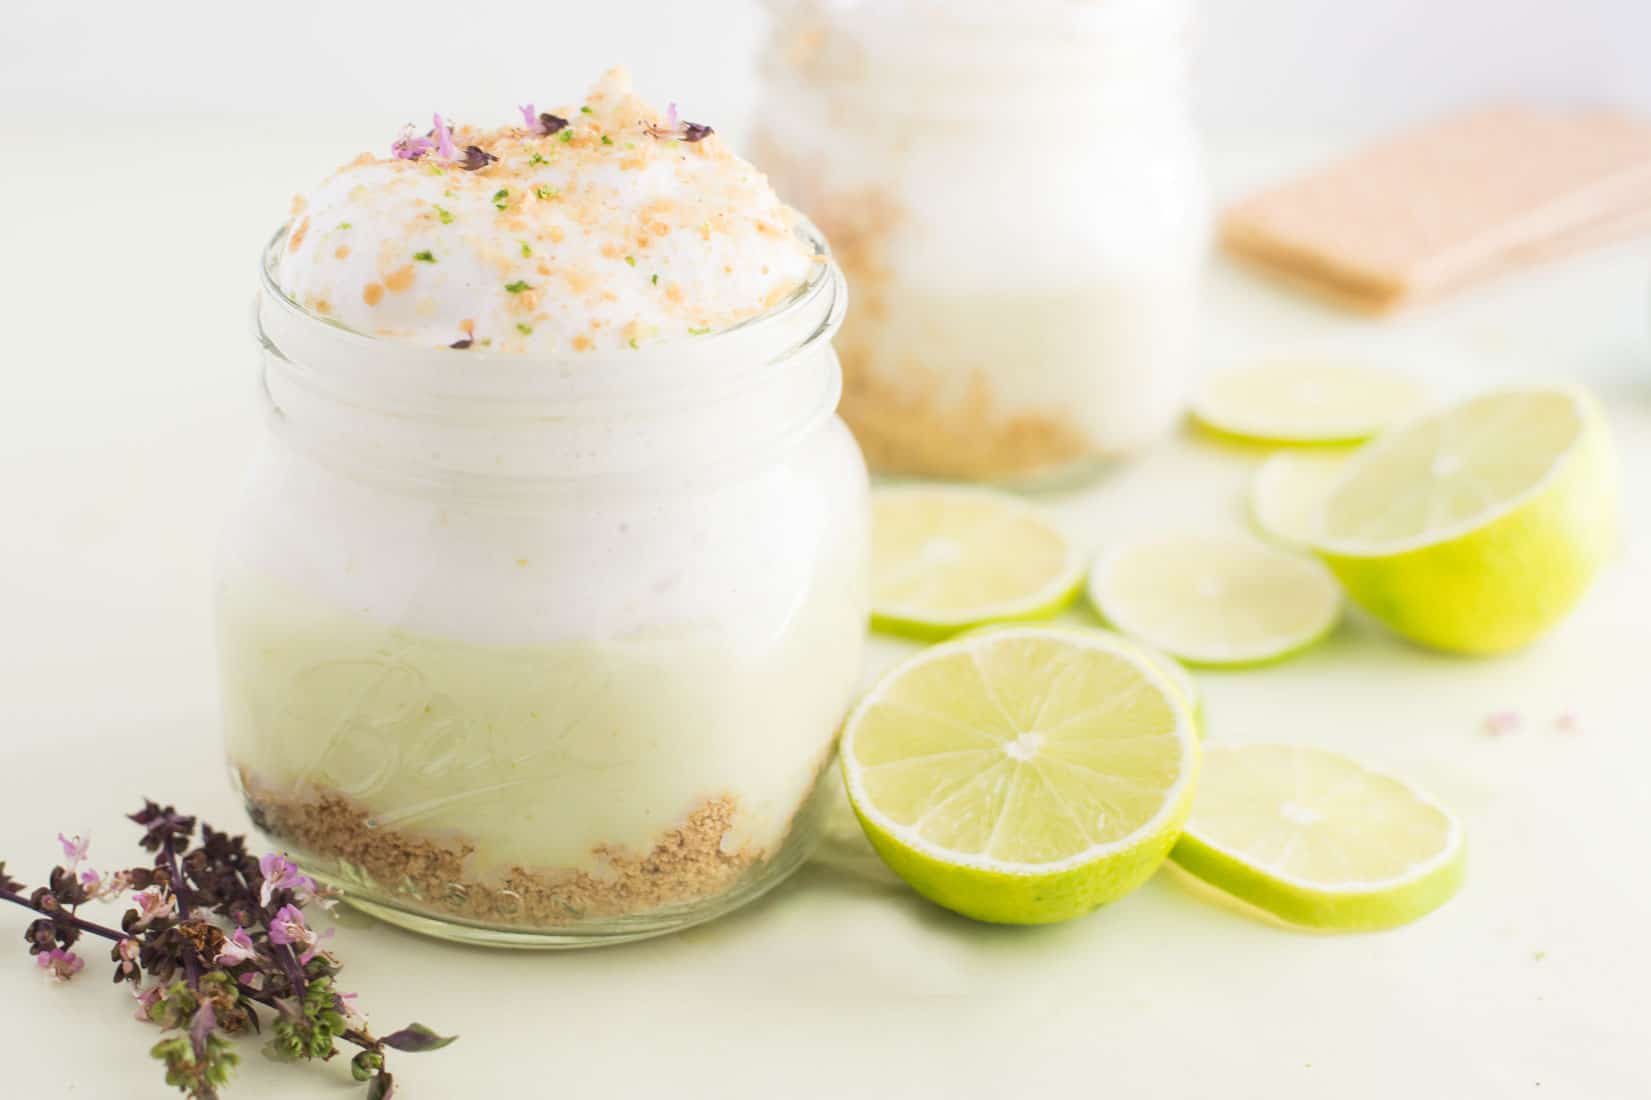 vegan key lime pie parfaits with lime wedges and purple flowers